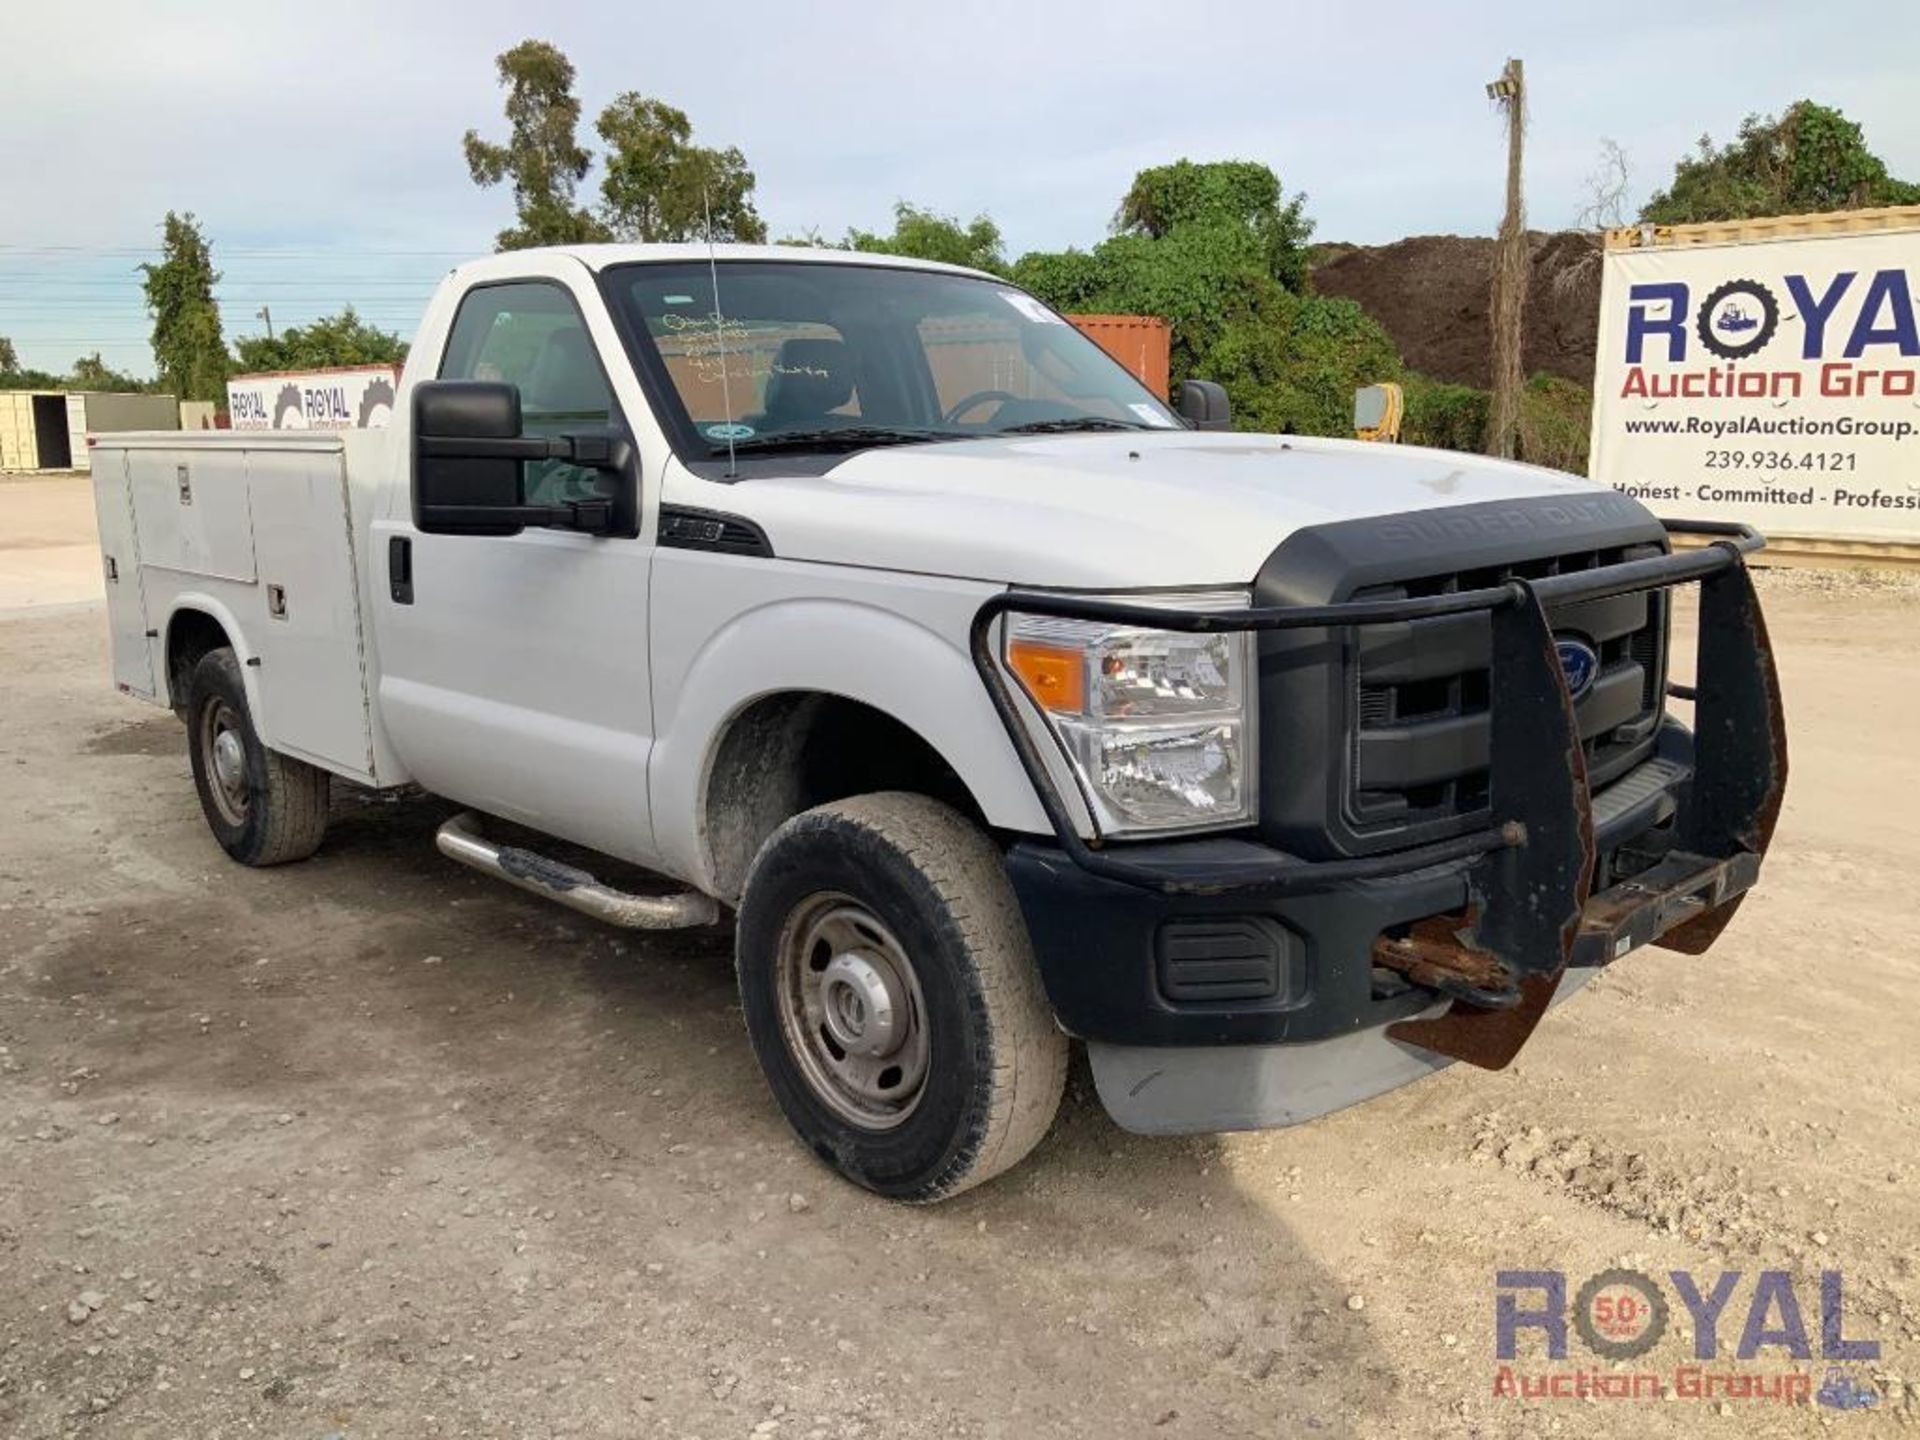 2013 Ford F250 4x4 Service Truck - Image 2 of 27